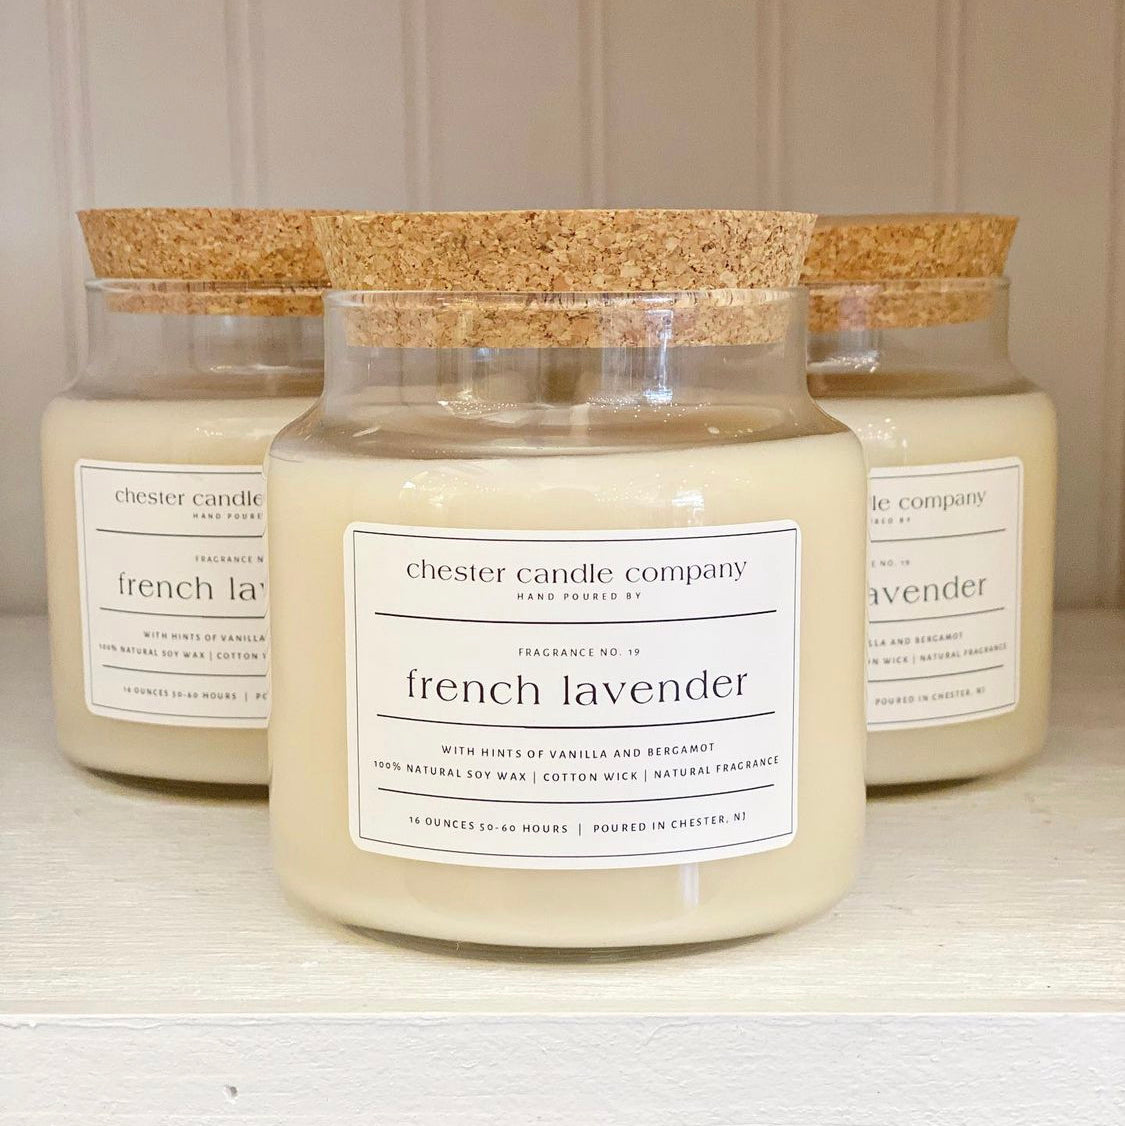 Natural Soy Wax Candle in a Clear Glass Apothecary-Style Jar and a Cork Lid. White Label on the Jar Reads "chester candle company. Fragrance No. 19. french lavender with hints of vanilla and bergamot. 100% Natural Soy Wax, Cotton Wick, Natural Fragrance. 16 ounces 50-60 hours. Poured in Chester, NJ”